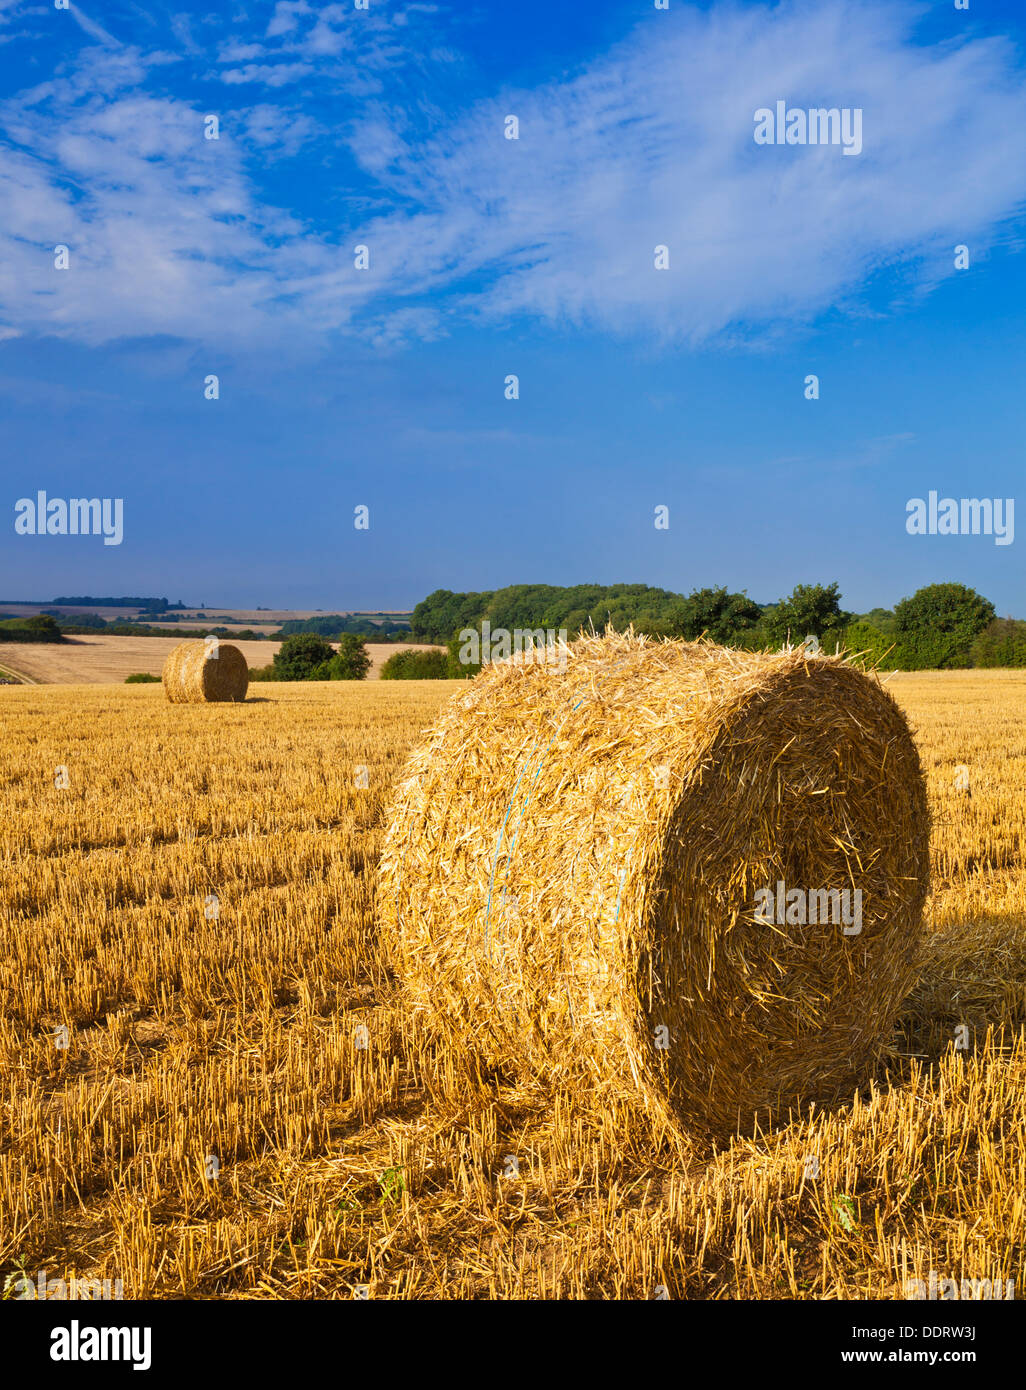 Wheat field harvested and straw bales made Lincolnshire Wolds England UK GB EU Europe Stock Photo